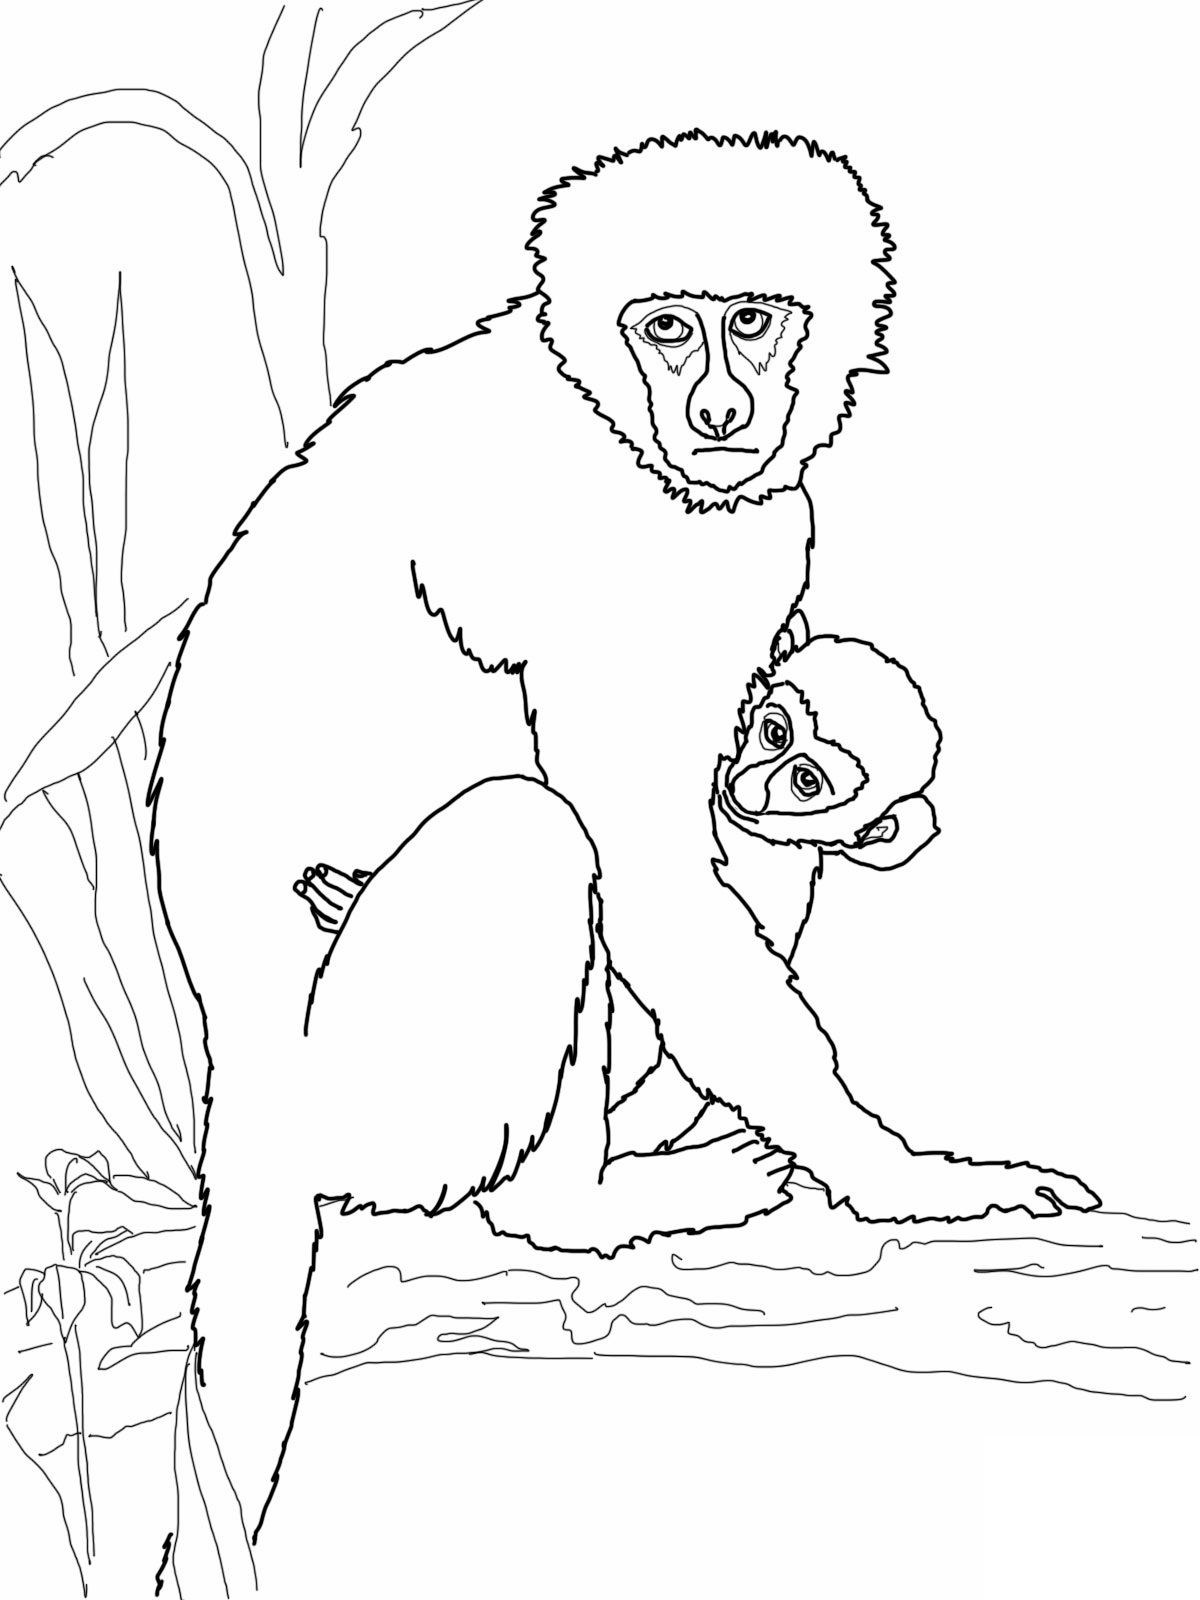 Free printable monkey coloring pages for kids